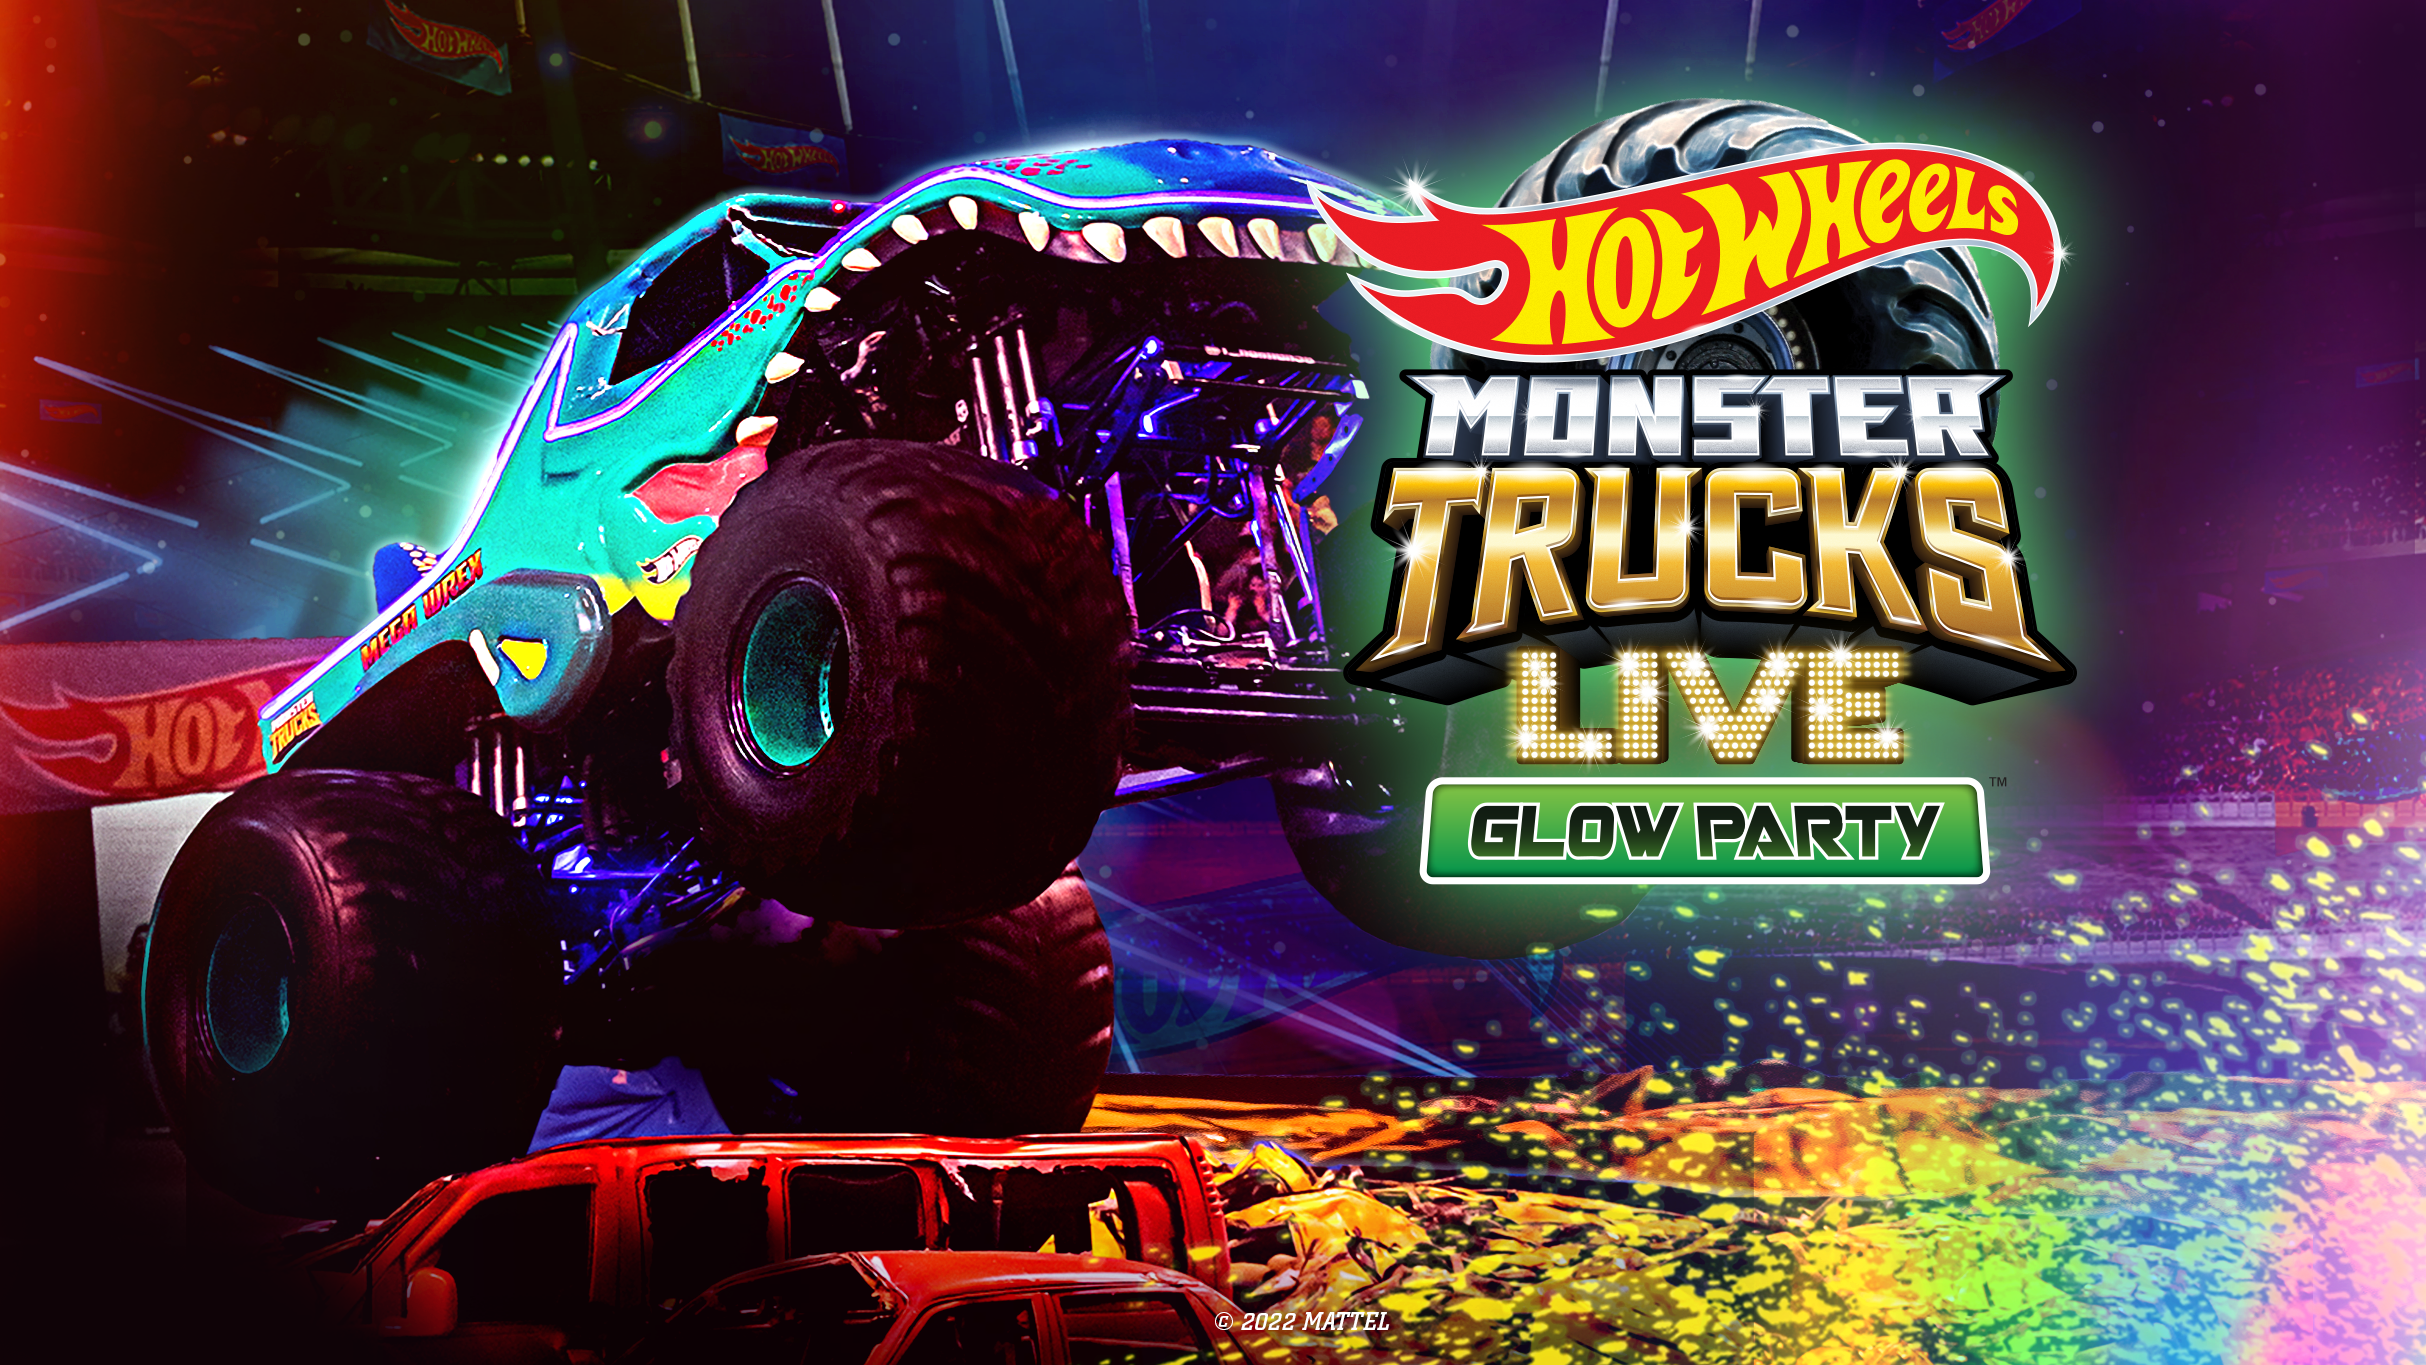 Hot Wheels Monster Trucks Live Glow Party free presale code for early tickets in Louisville